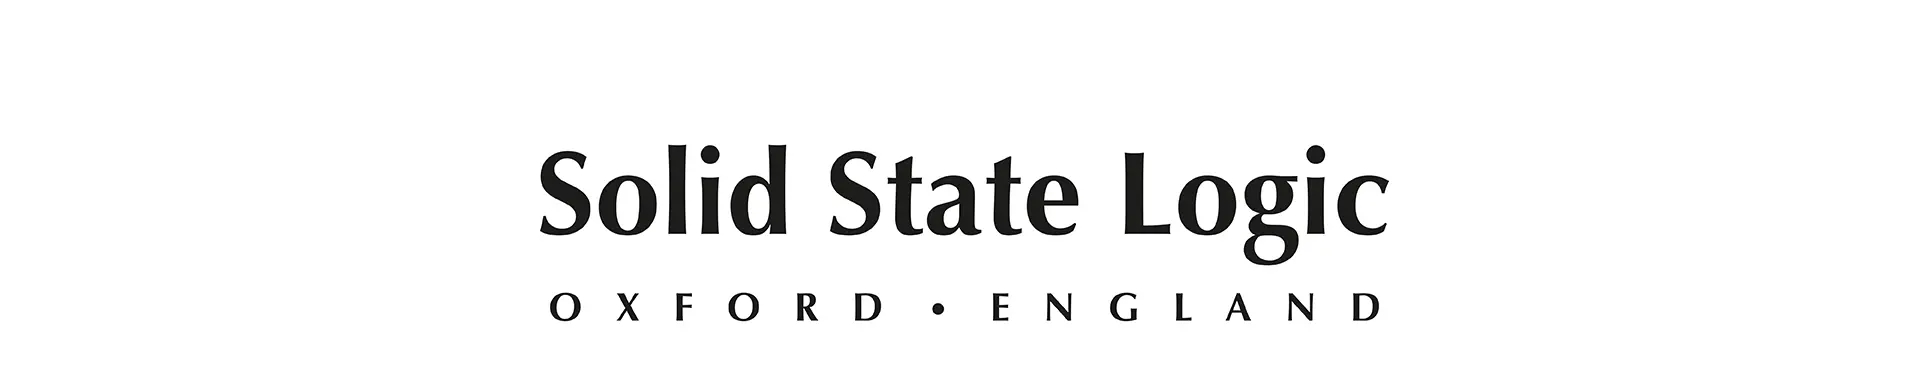 solid state logic banner